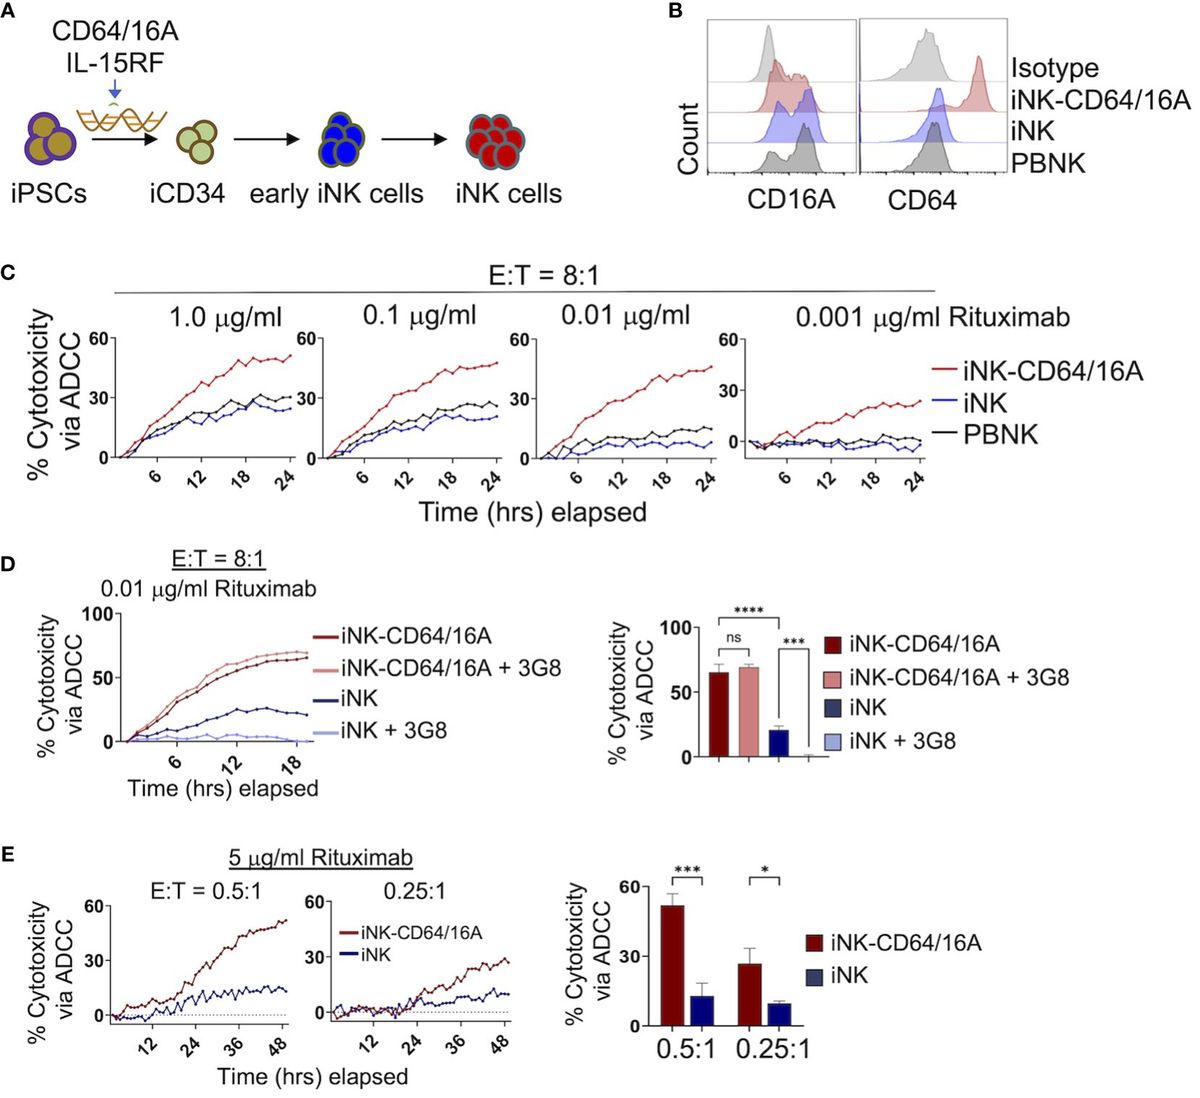 iPSC-derived NK cells expressing high-affinity IgG Fc receptor fusion CD64/16A to mediate flexible, multi-tumor antigen targeting for lymphoma